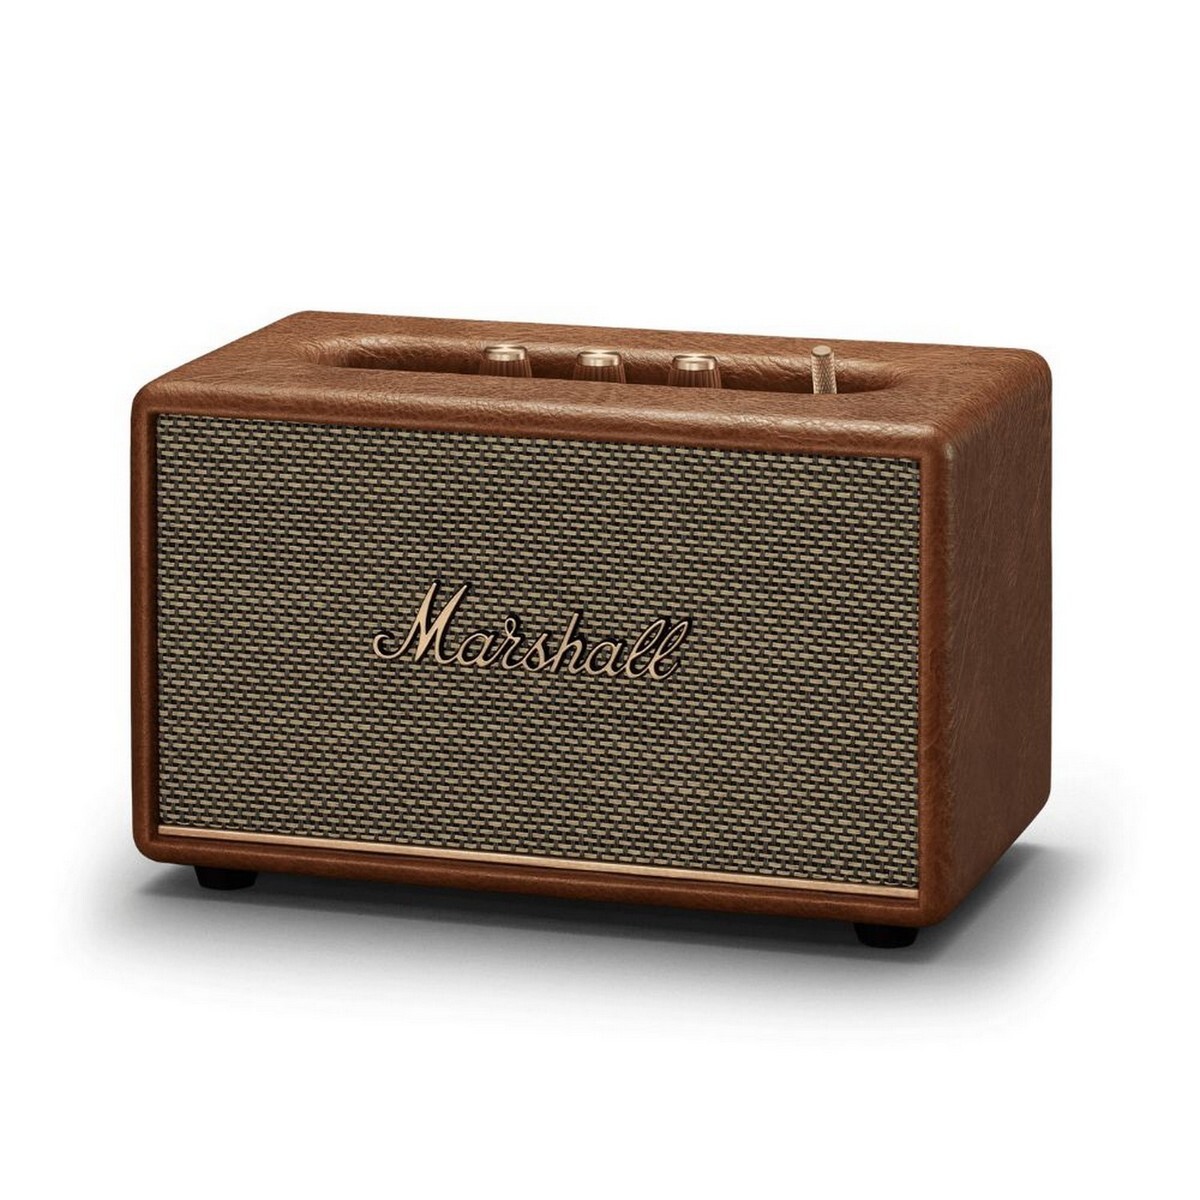 Marshall Bluetooth Speaker Action lll Brown